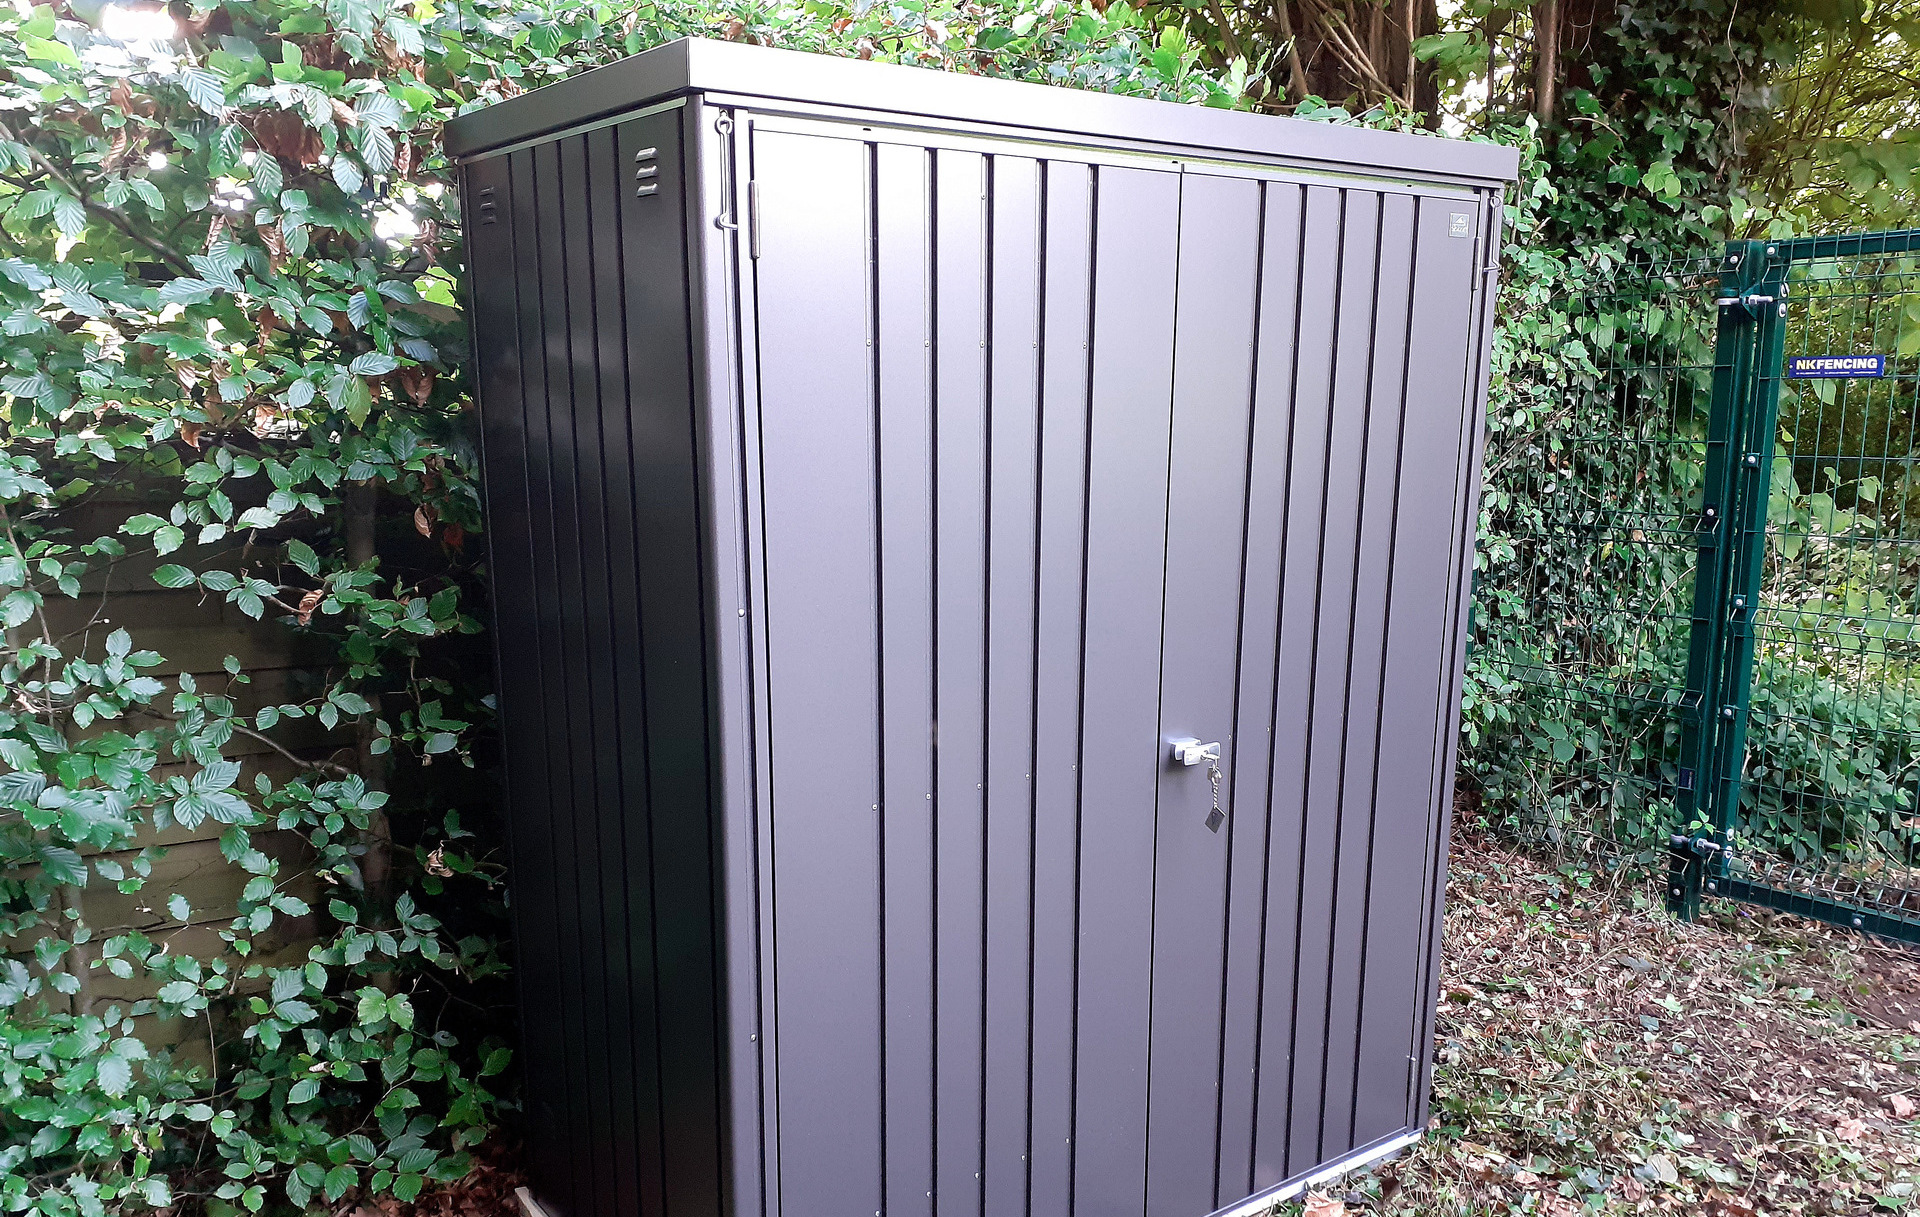 The superb quality and style of the Biohort Equipment Locker 150 in metallic dark grey  with optional accessories including aluminium floor frame, aluminium floor panels | supplied + installed in Belfast by Owen Chubb Landscapers. Tel 087-2306 128.